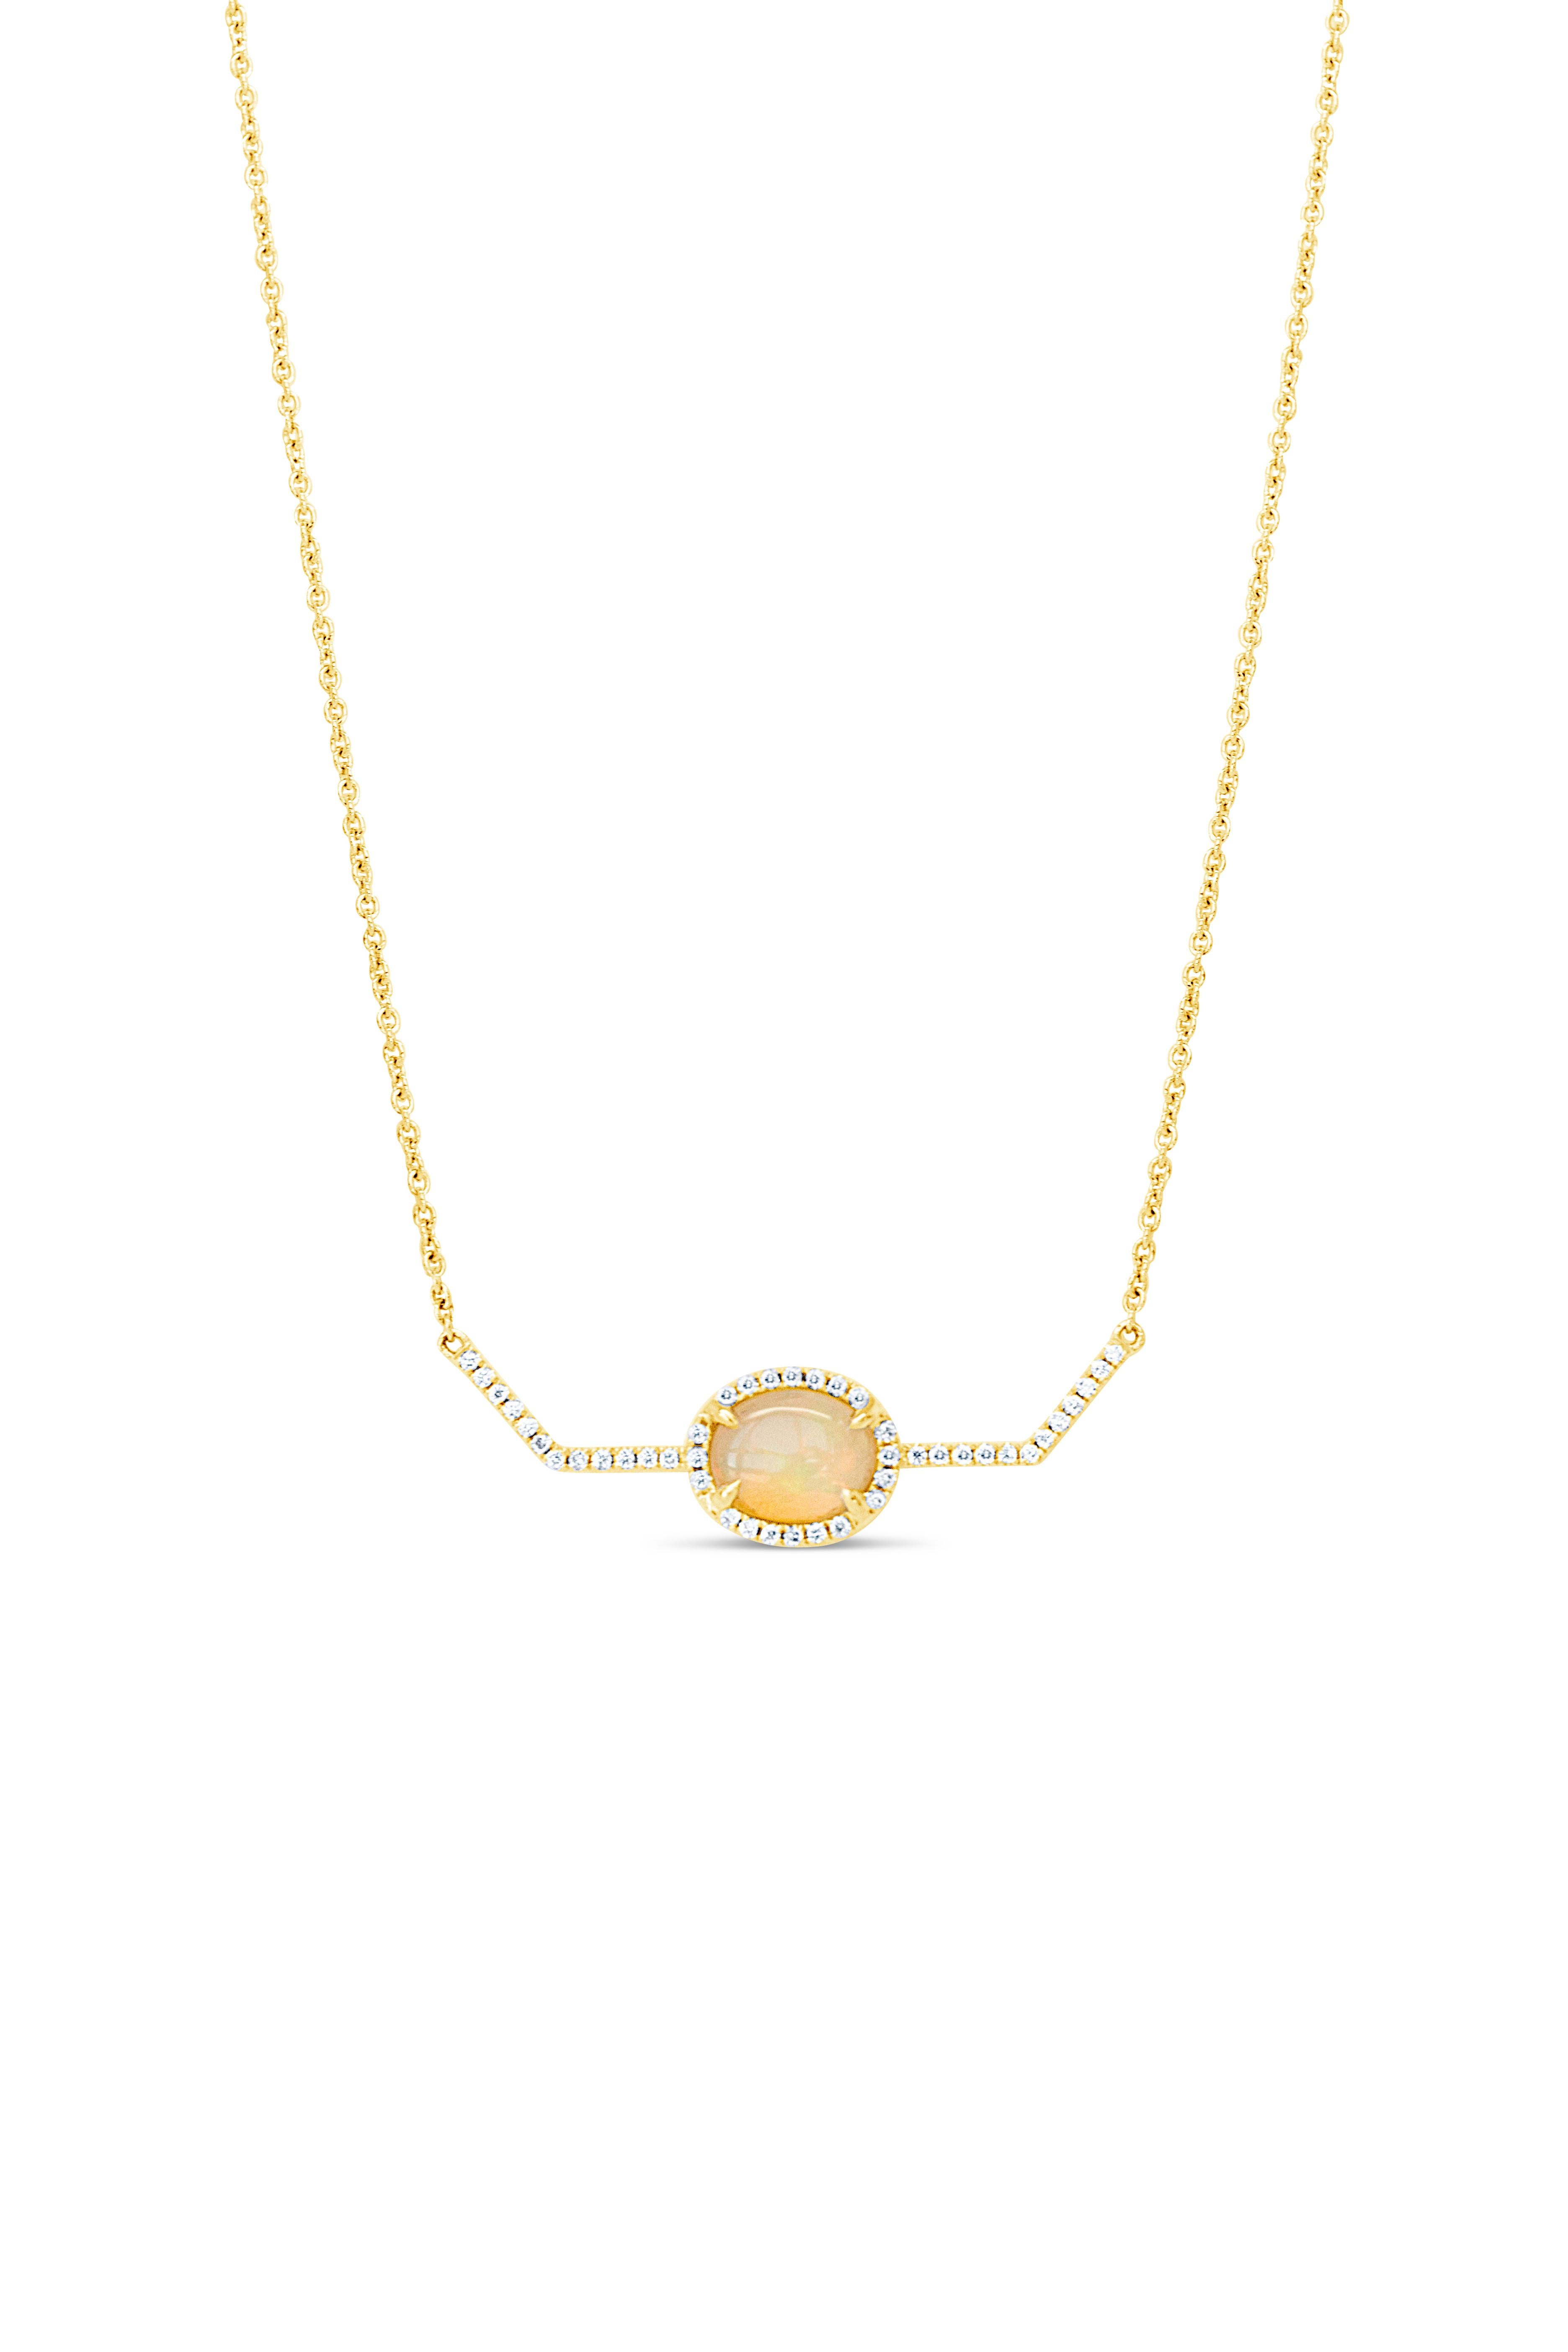 Opal and diamond necklace in 18k yellow gold.